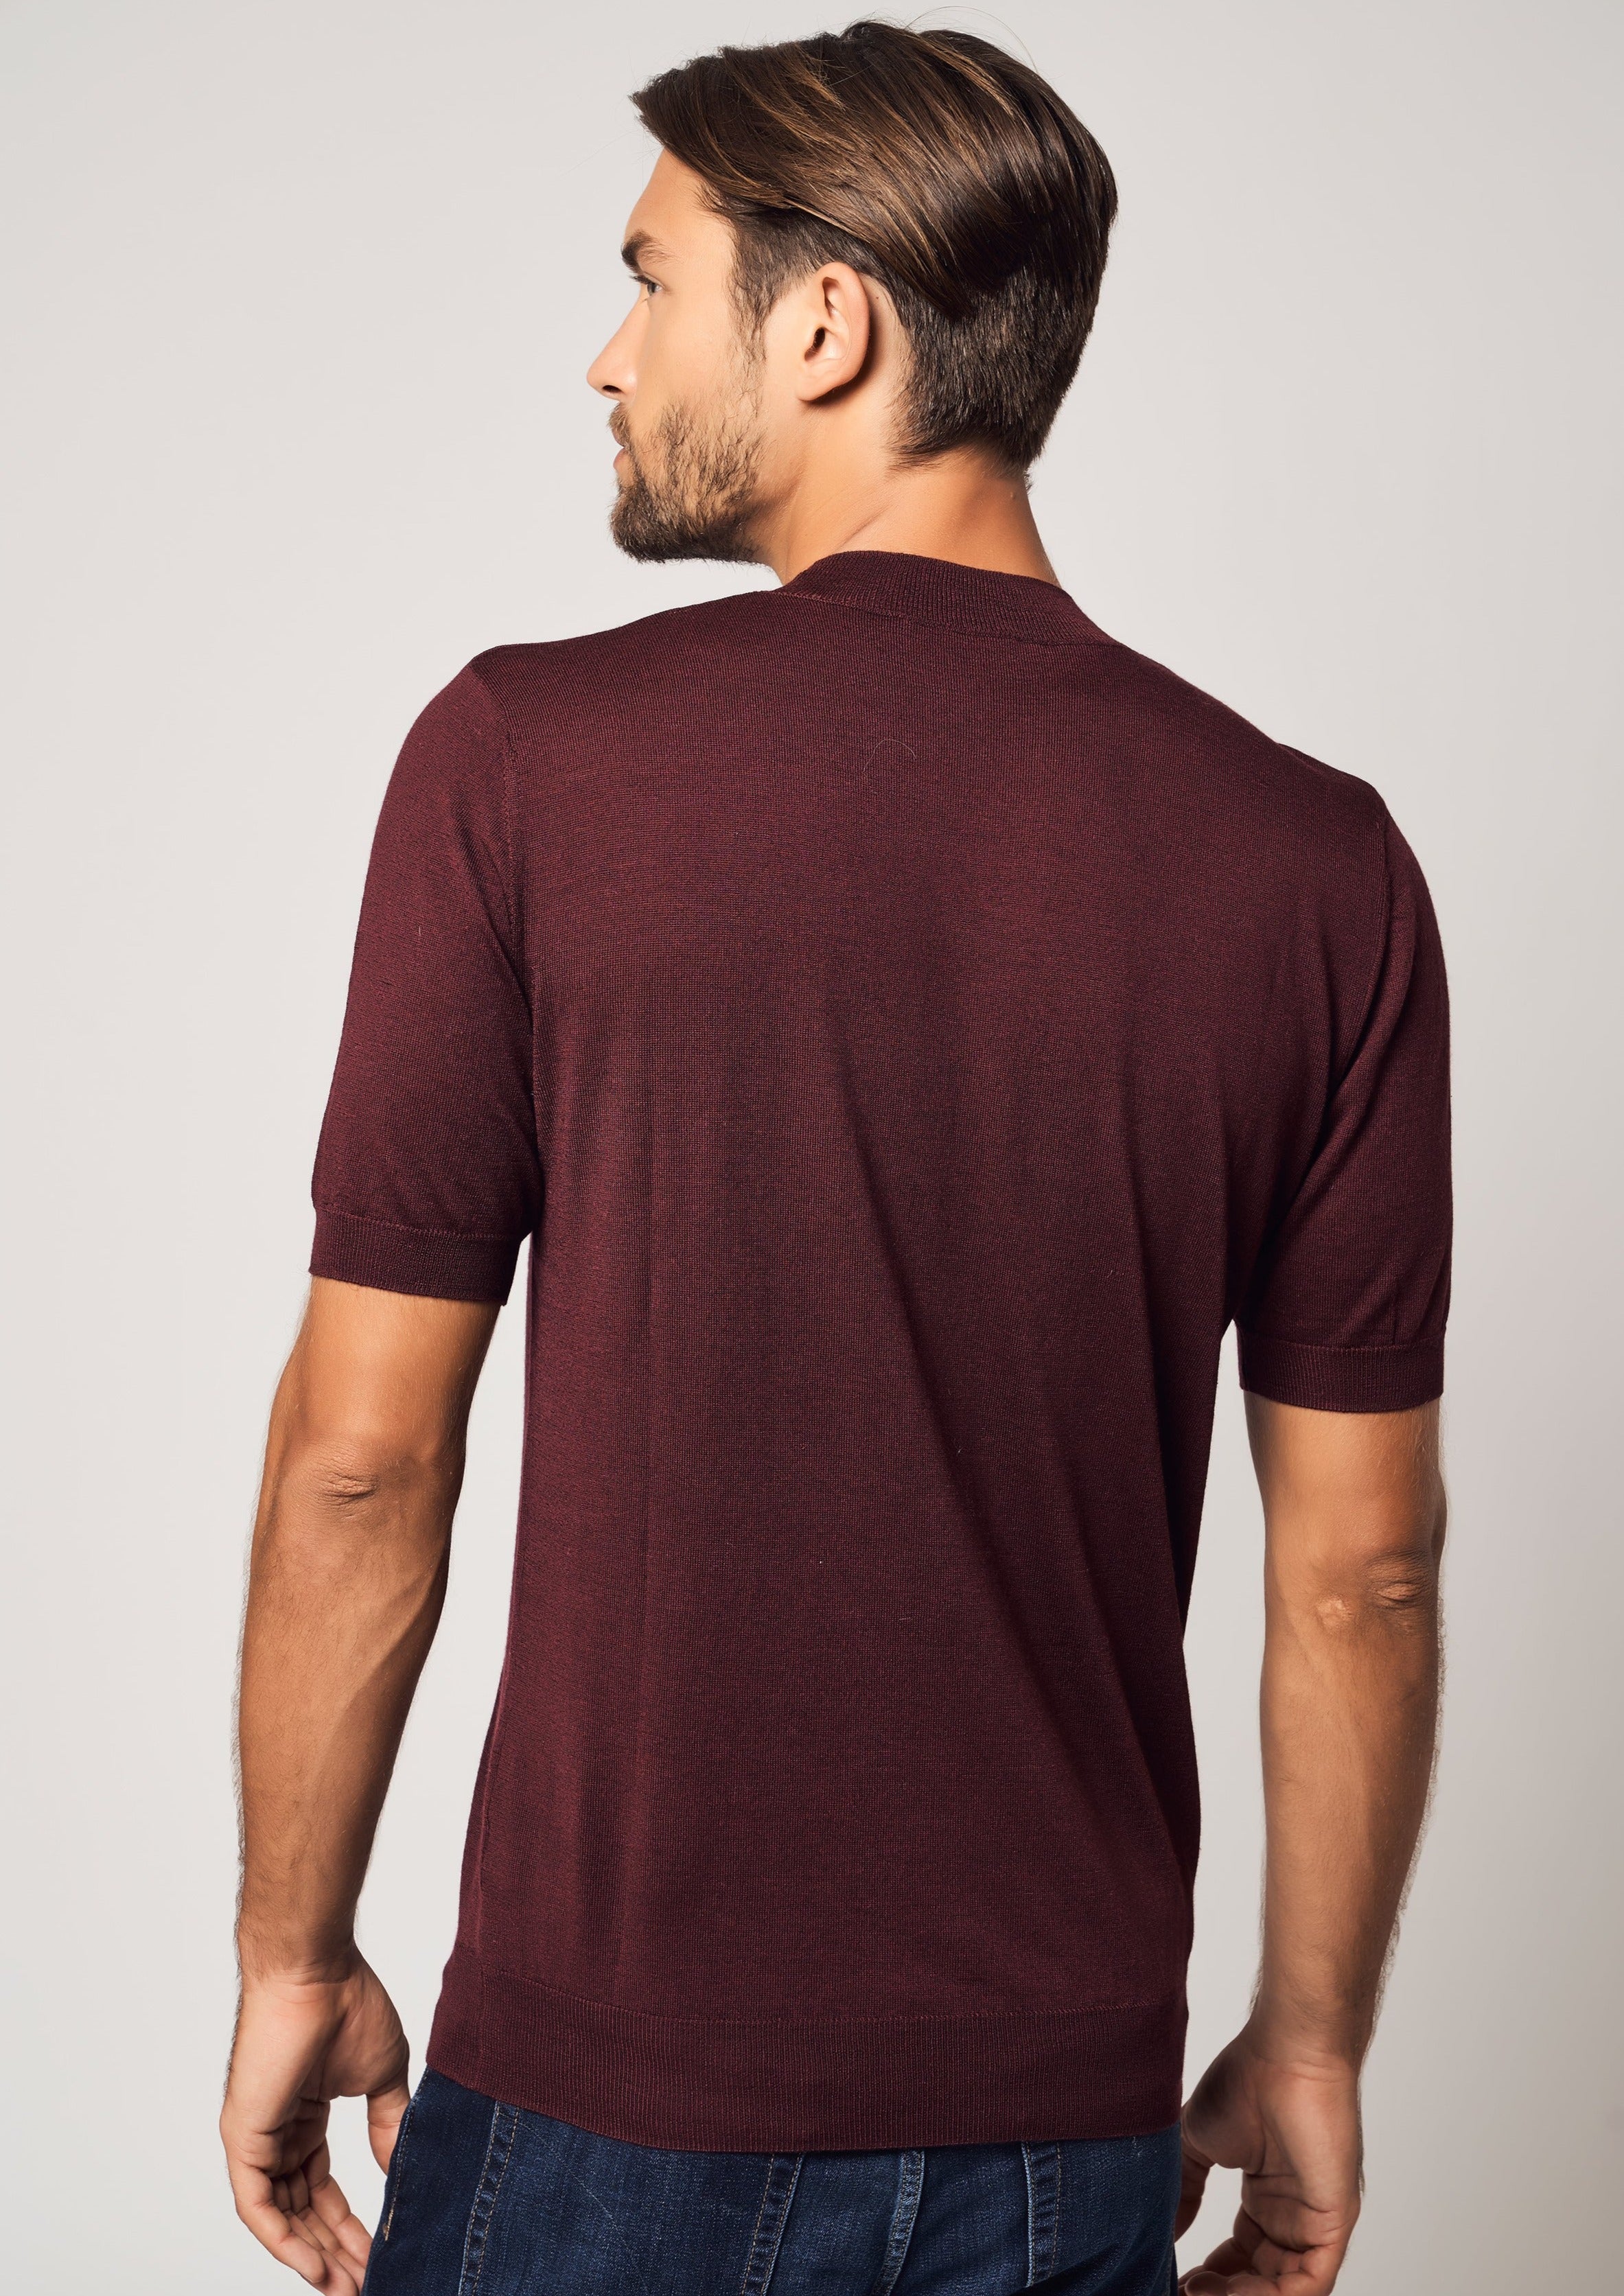 Silk Cashmere High Neck Short Sleeve Tee | Bellemere New York | 100% Cashmere Sustainable